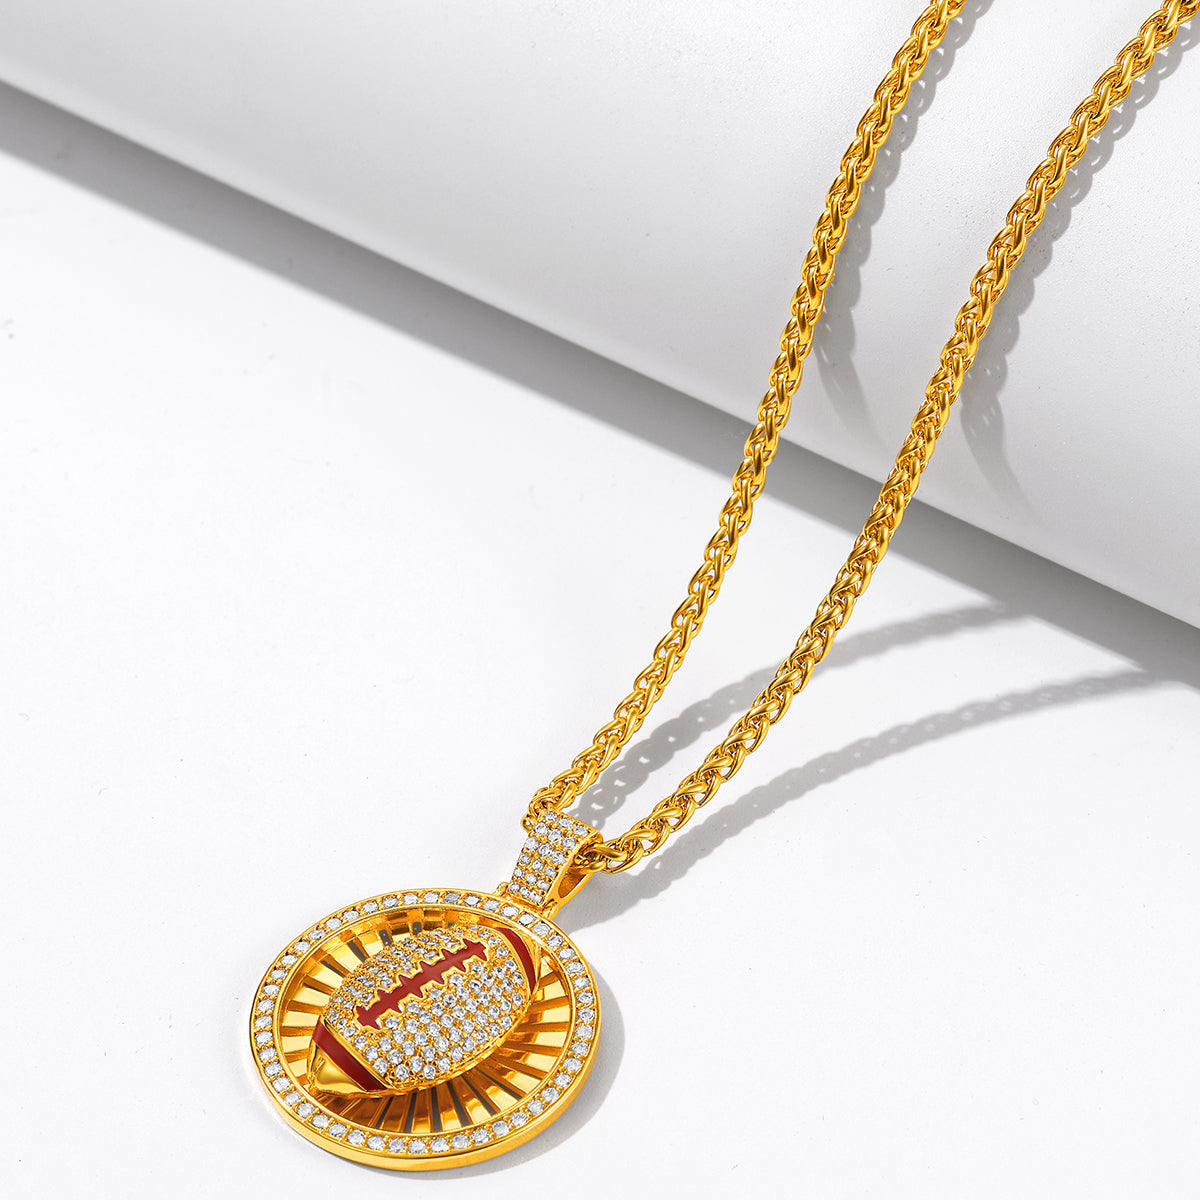 Customizable Gold Zirconia Football Round Medal Necklaces for Sports FaithHeart